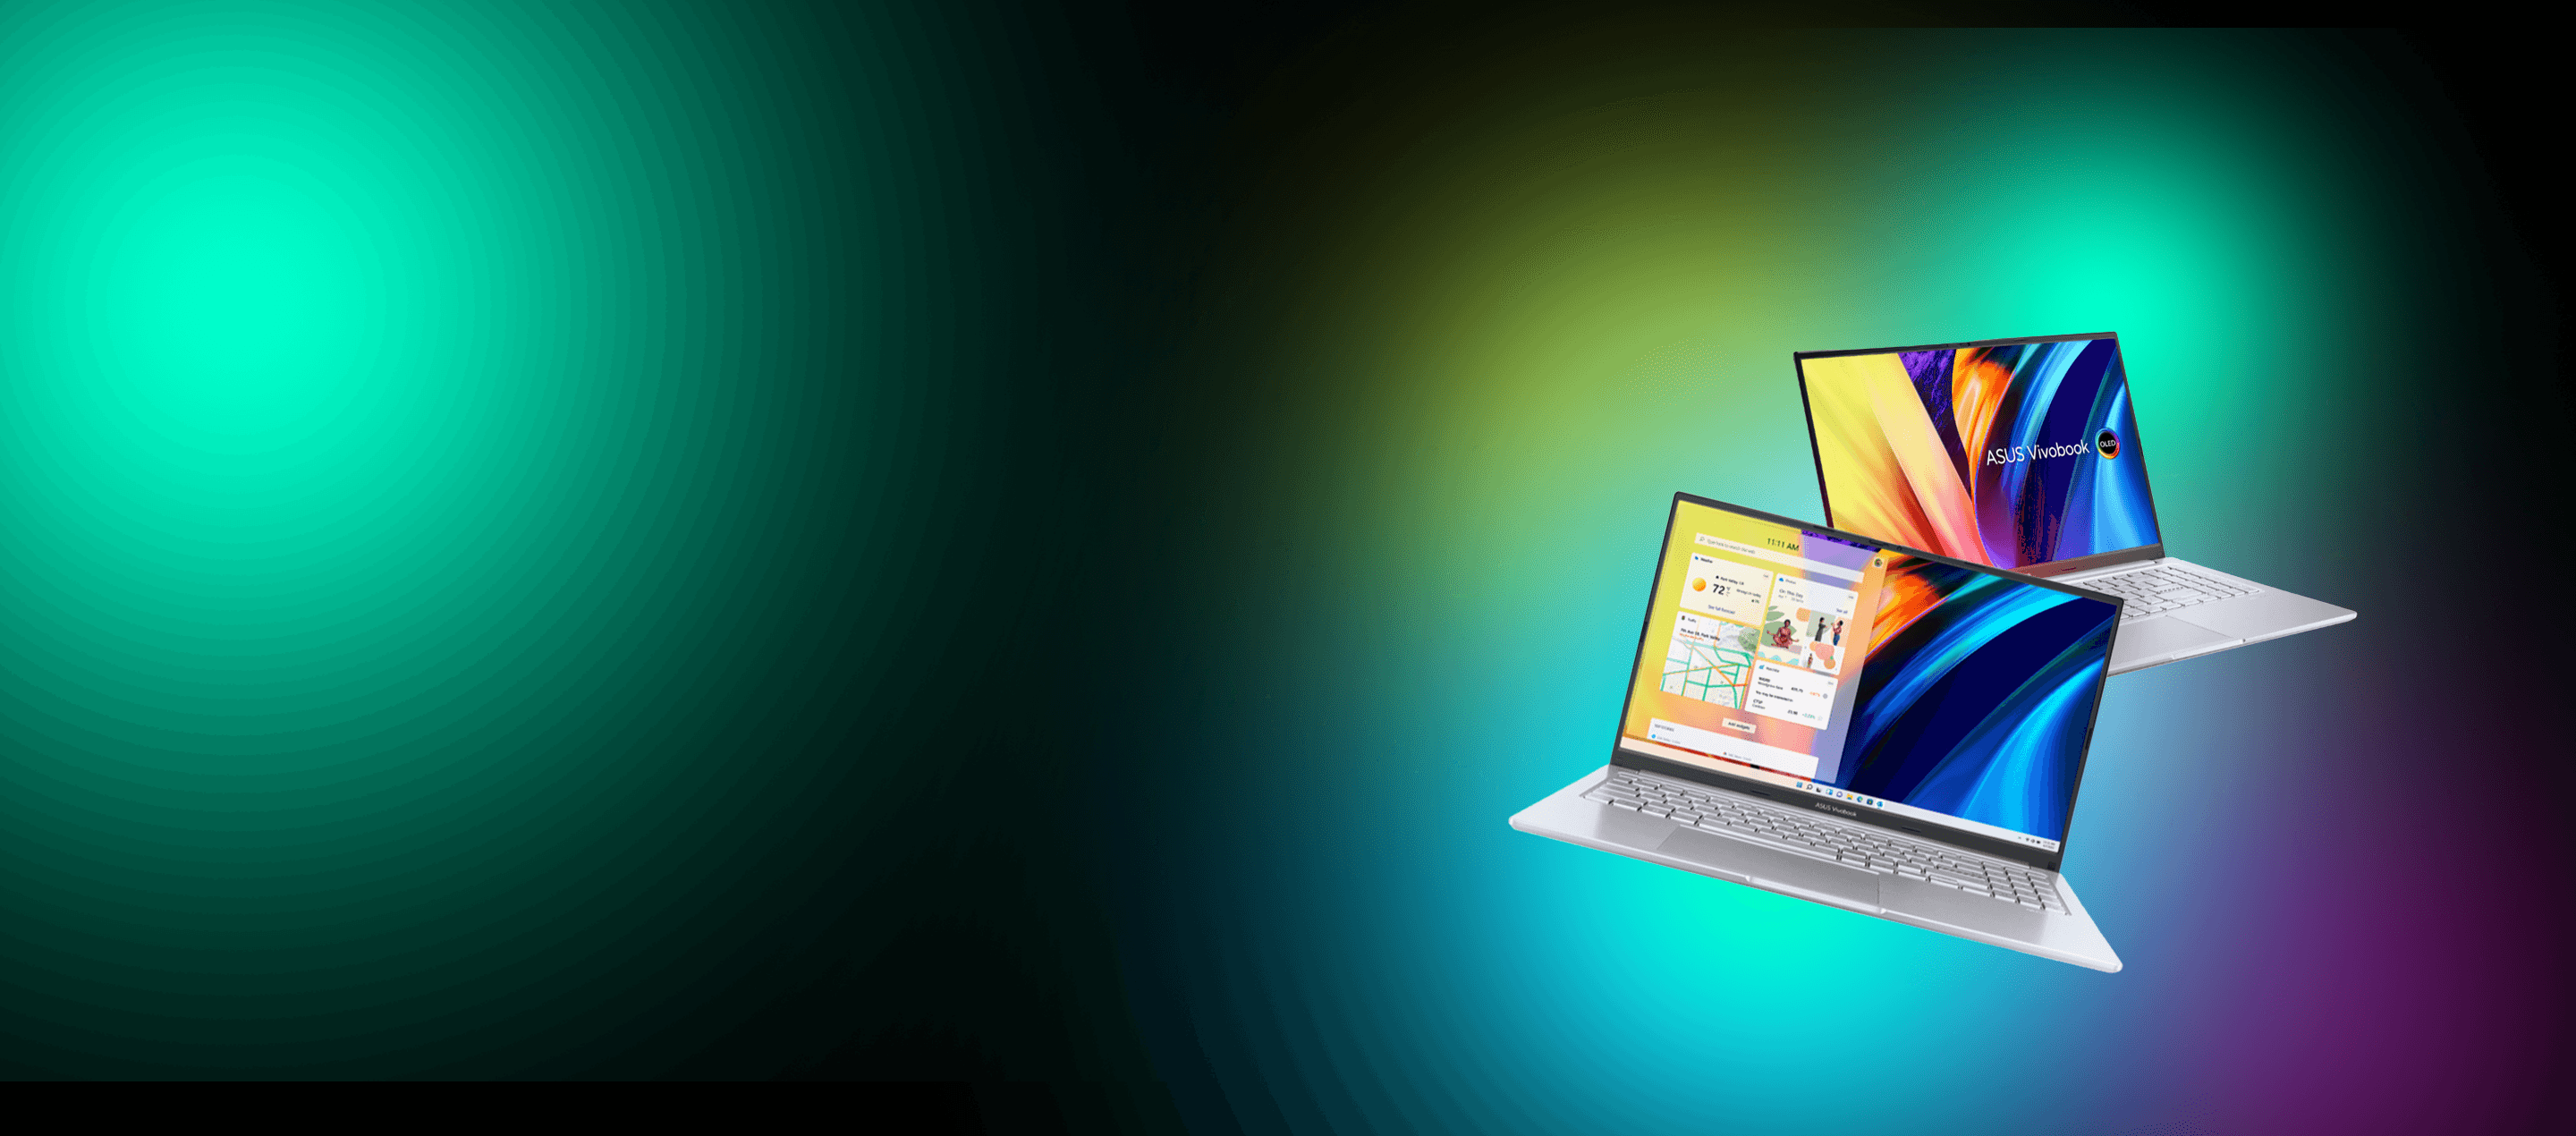 Two laptops are floating in midair with colourful background.